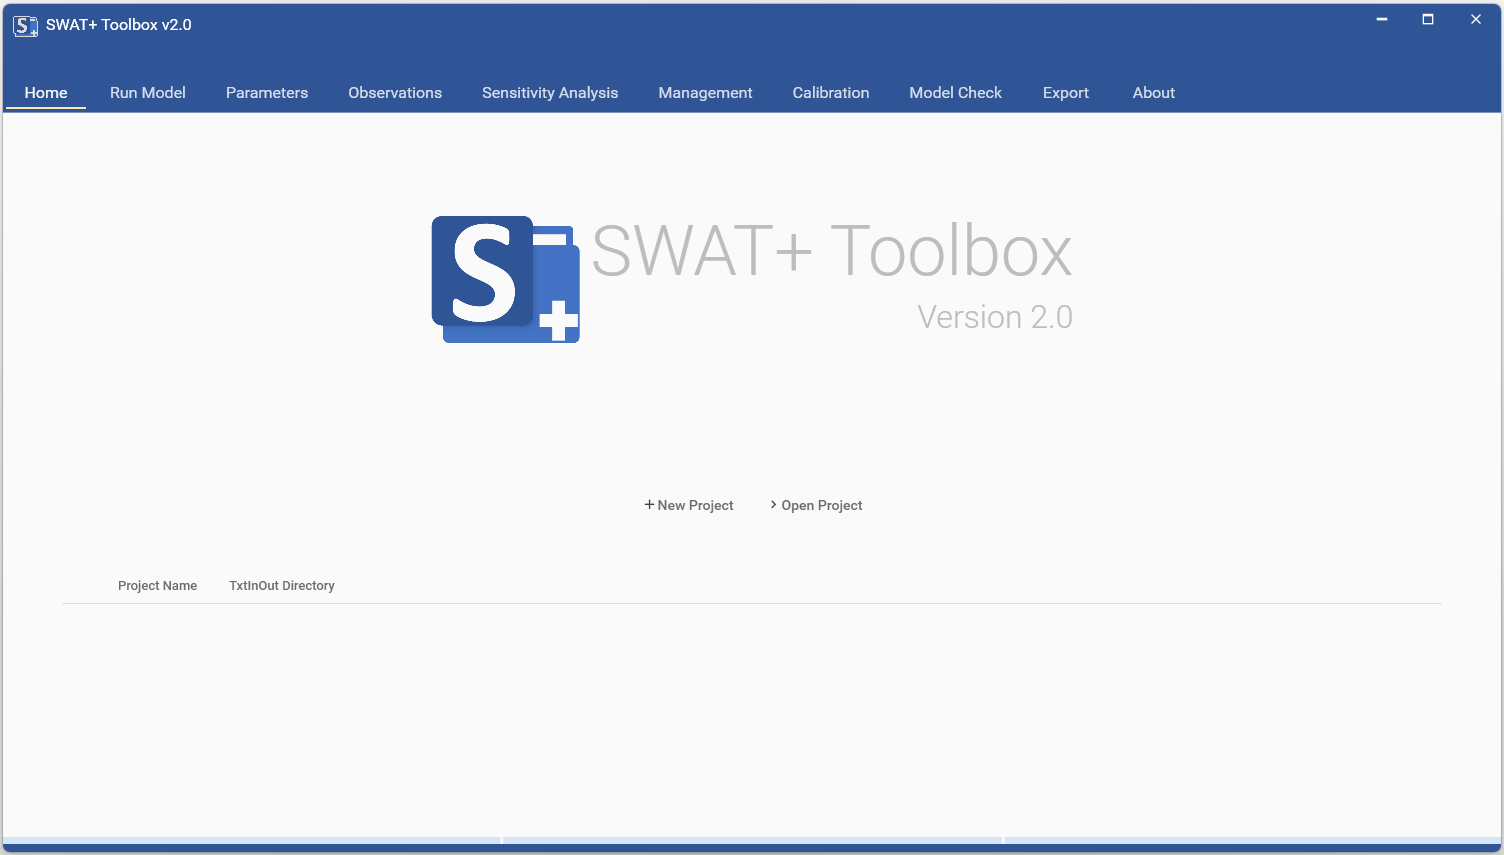 Image of the SWAT+ Toobox v1.3 start page